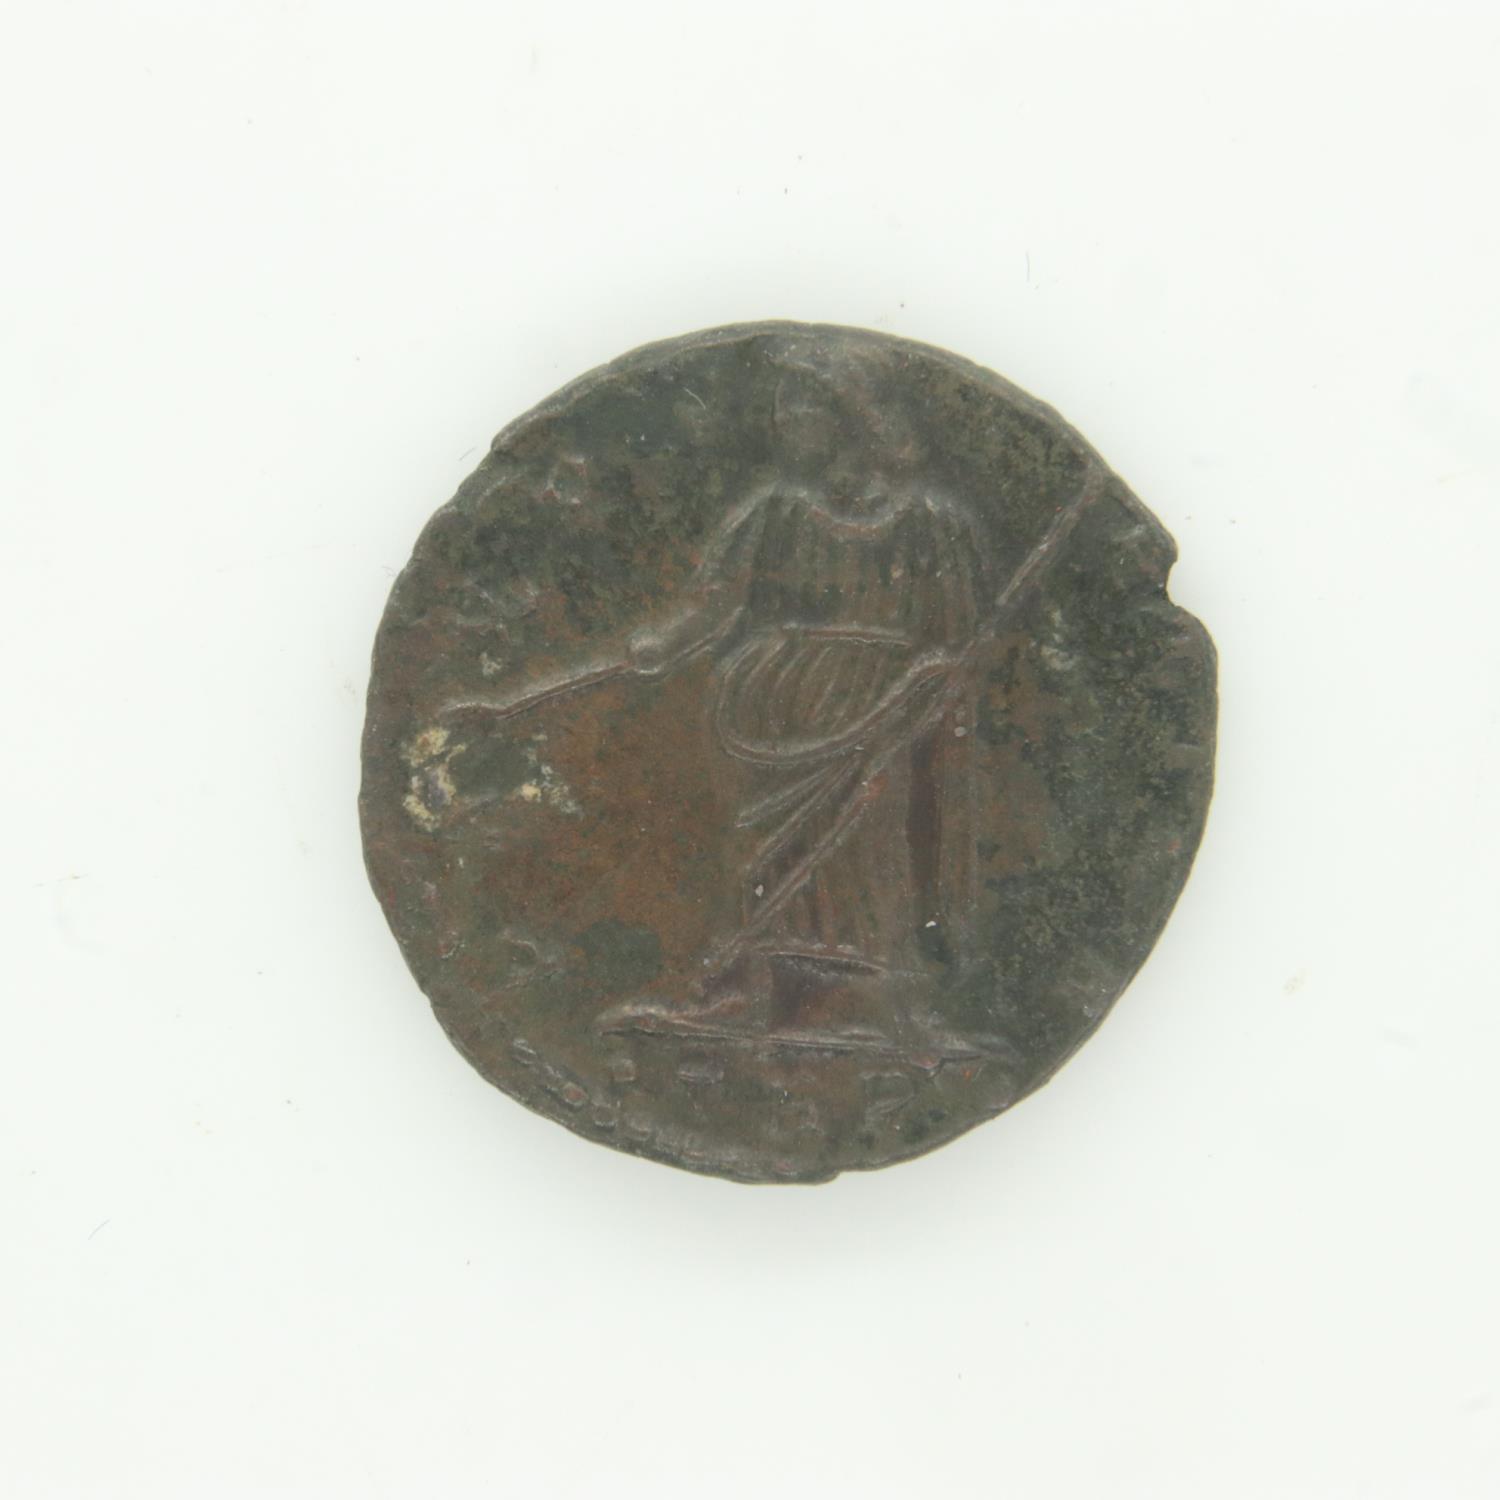 Roman AE4 of Licinius, 3rd mint of Nicomedia. UK P&P Group 0 (£6+VAT for the first lot and £1+VAT